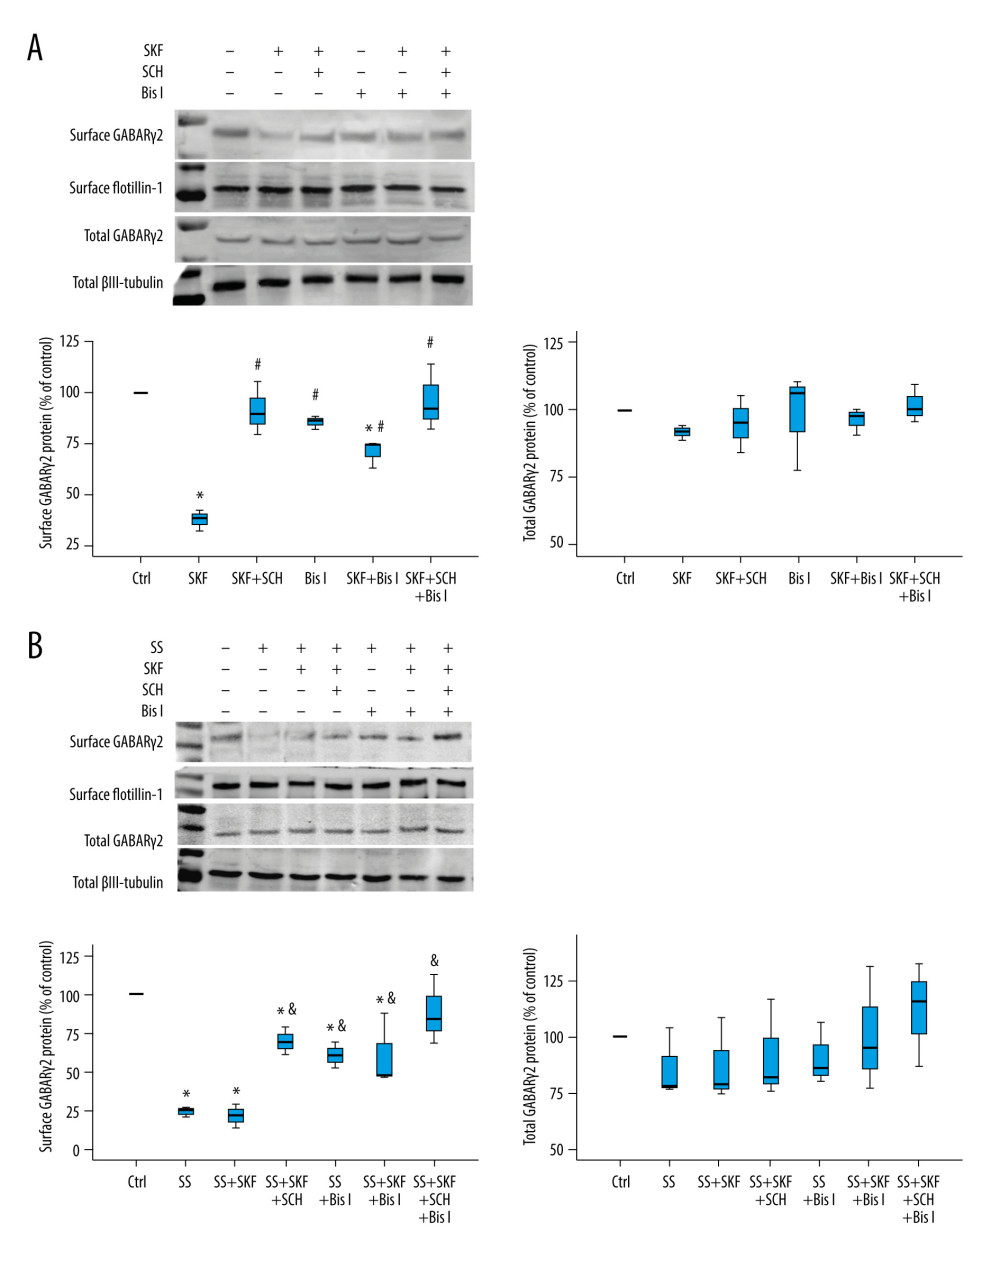 Expression of GABARγ2 proteins before and after PKC inhibitor application. (A) The inhibitory effect of SKF on the surface expression of GABARγ2 was partially reversed by Bis I. Quantitative analysis of GABARγ2 total protein expression showed no considerable difference in these groups. (B) The inhibitory effect of SS, SS+SKF on the surface levels of GABARγ2 was partially reversed by SCH and Bis I. GABARγ2 total protein expression showed no significant difference in these groups. Data are presented as mean±SD. All experiments n=4, * P<0.05, vs the control group, # P<0.05, vs the SKF group, & P<0.05 vs the SS group, by one-way ANOVA and Tukey test. Odyssey 3.0.23 (LI-COR, USA) and SPSS 25.0 (USA) were used for the creation of the figures.